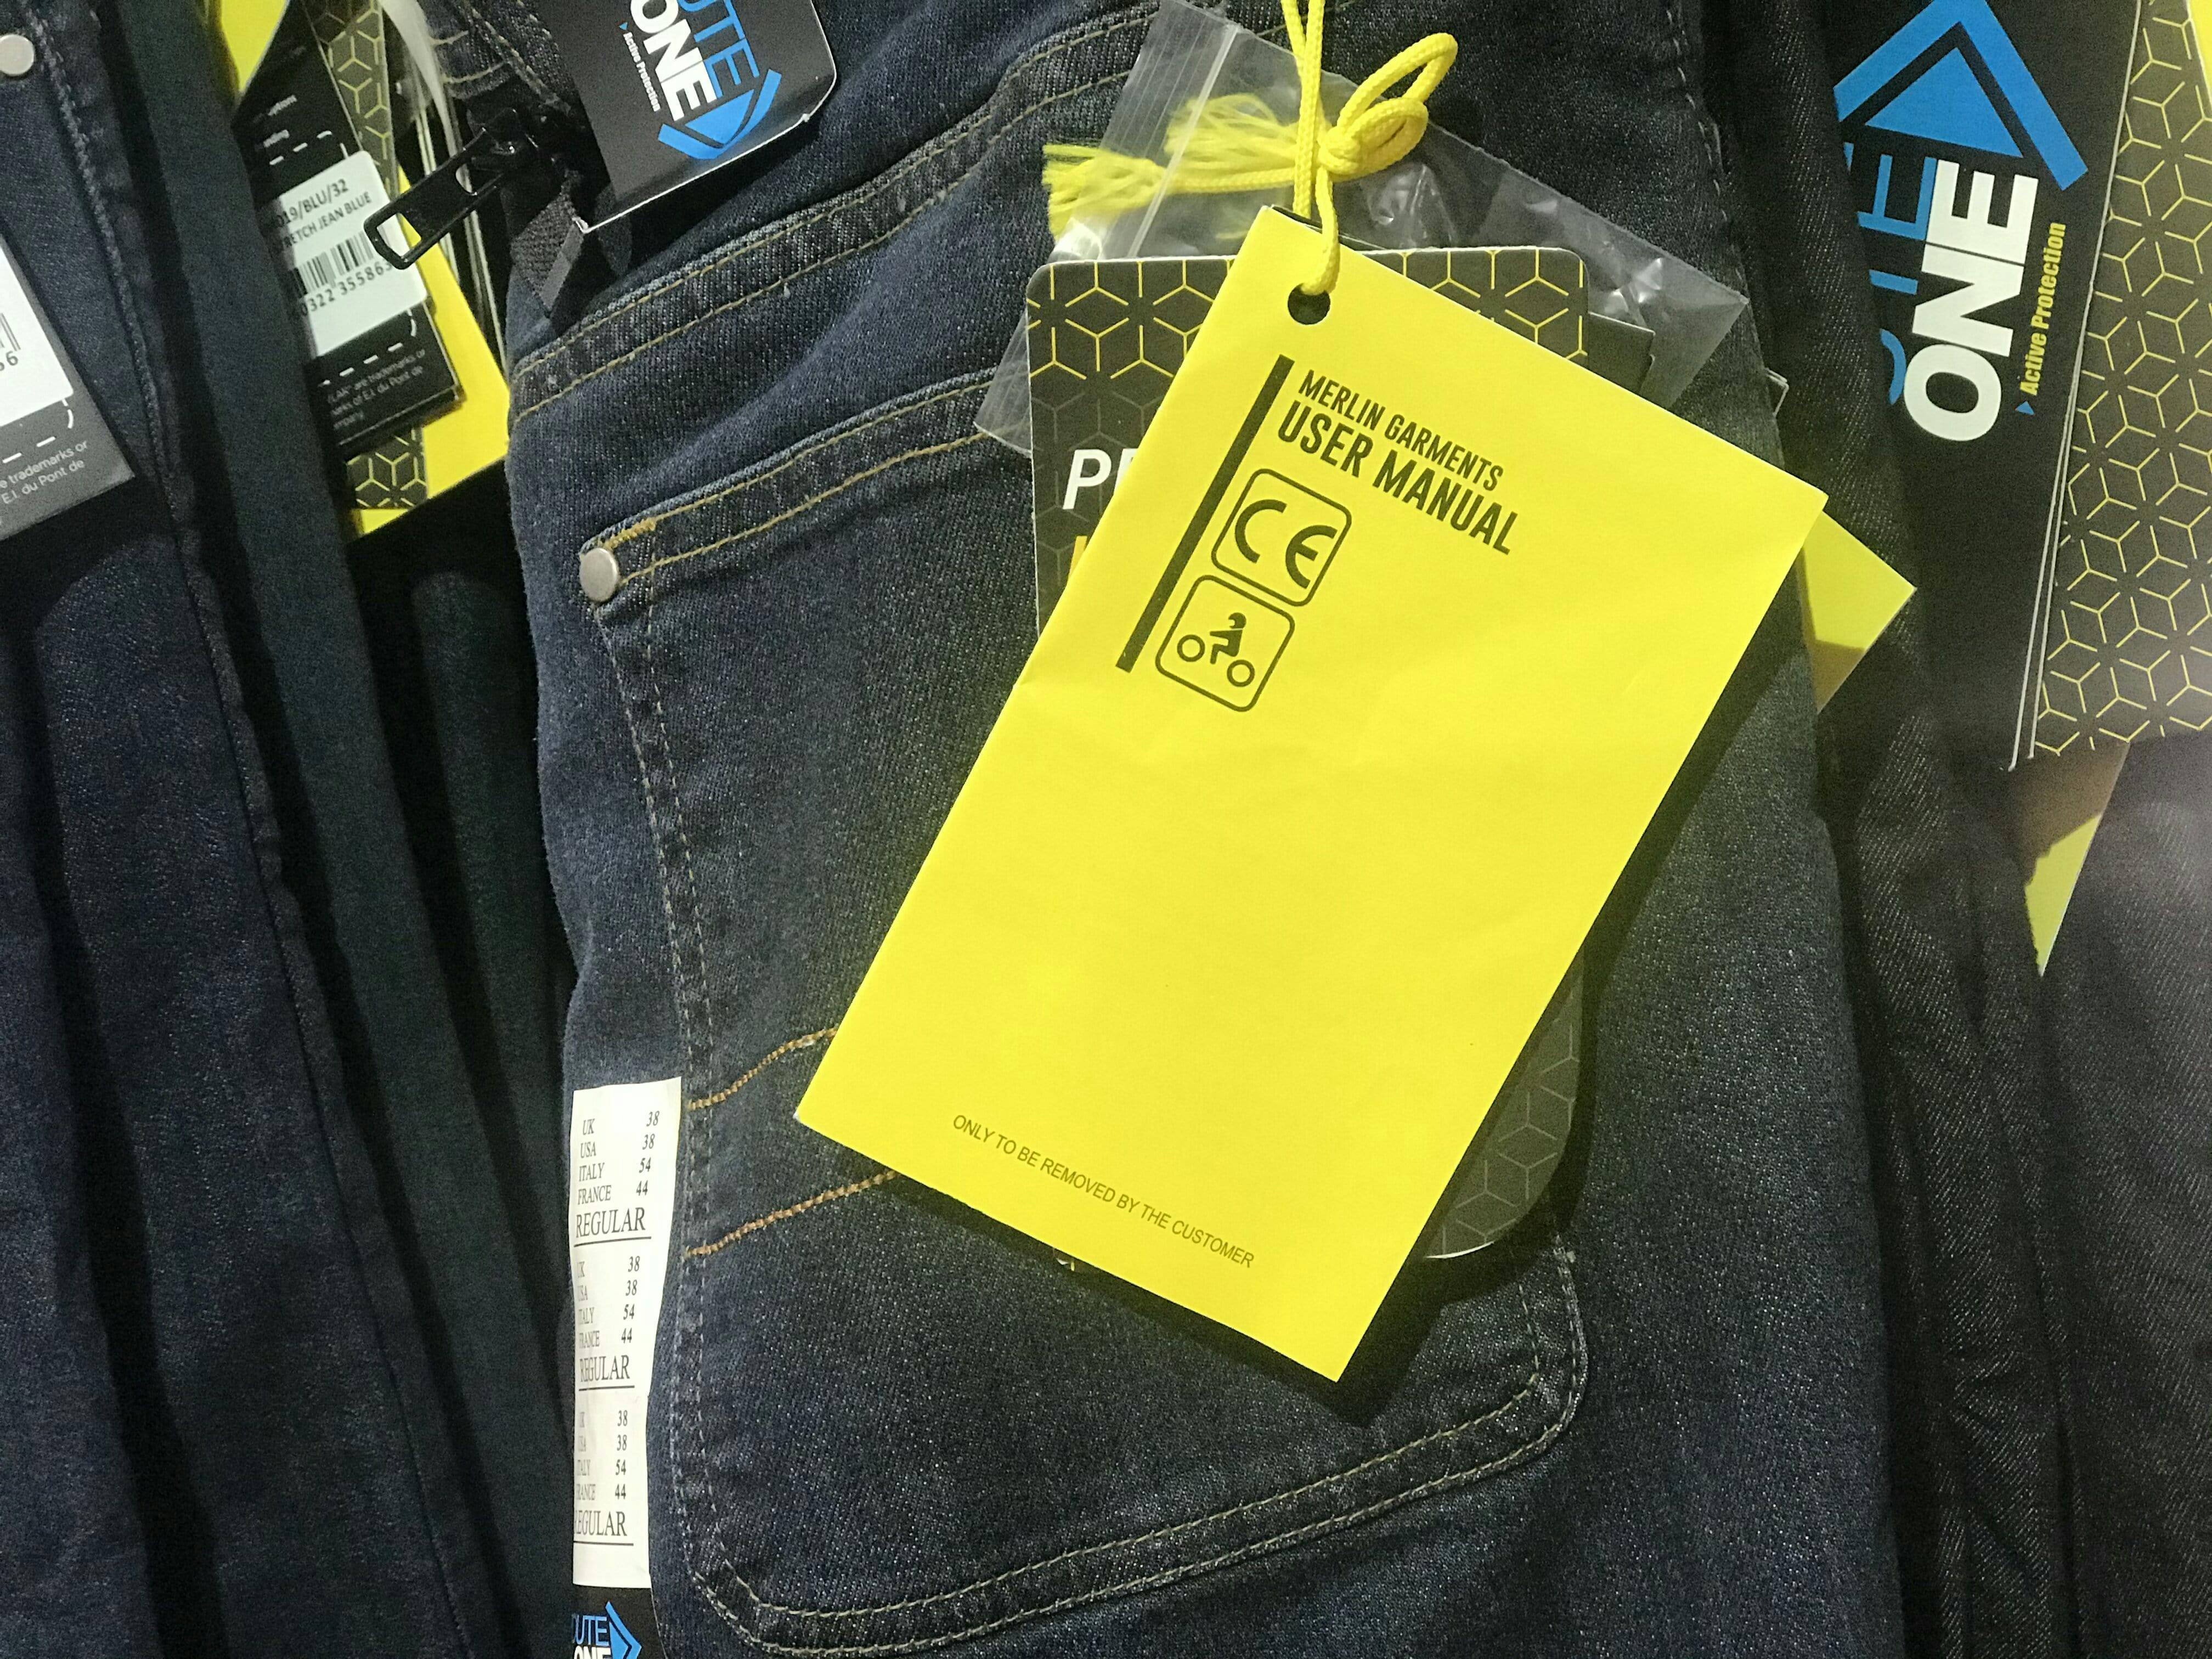 An information booklet on a pair of CE approved jeans